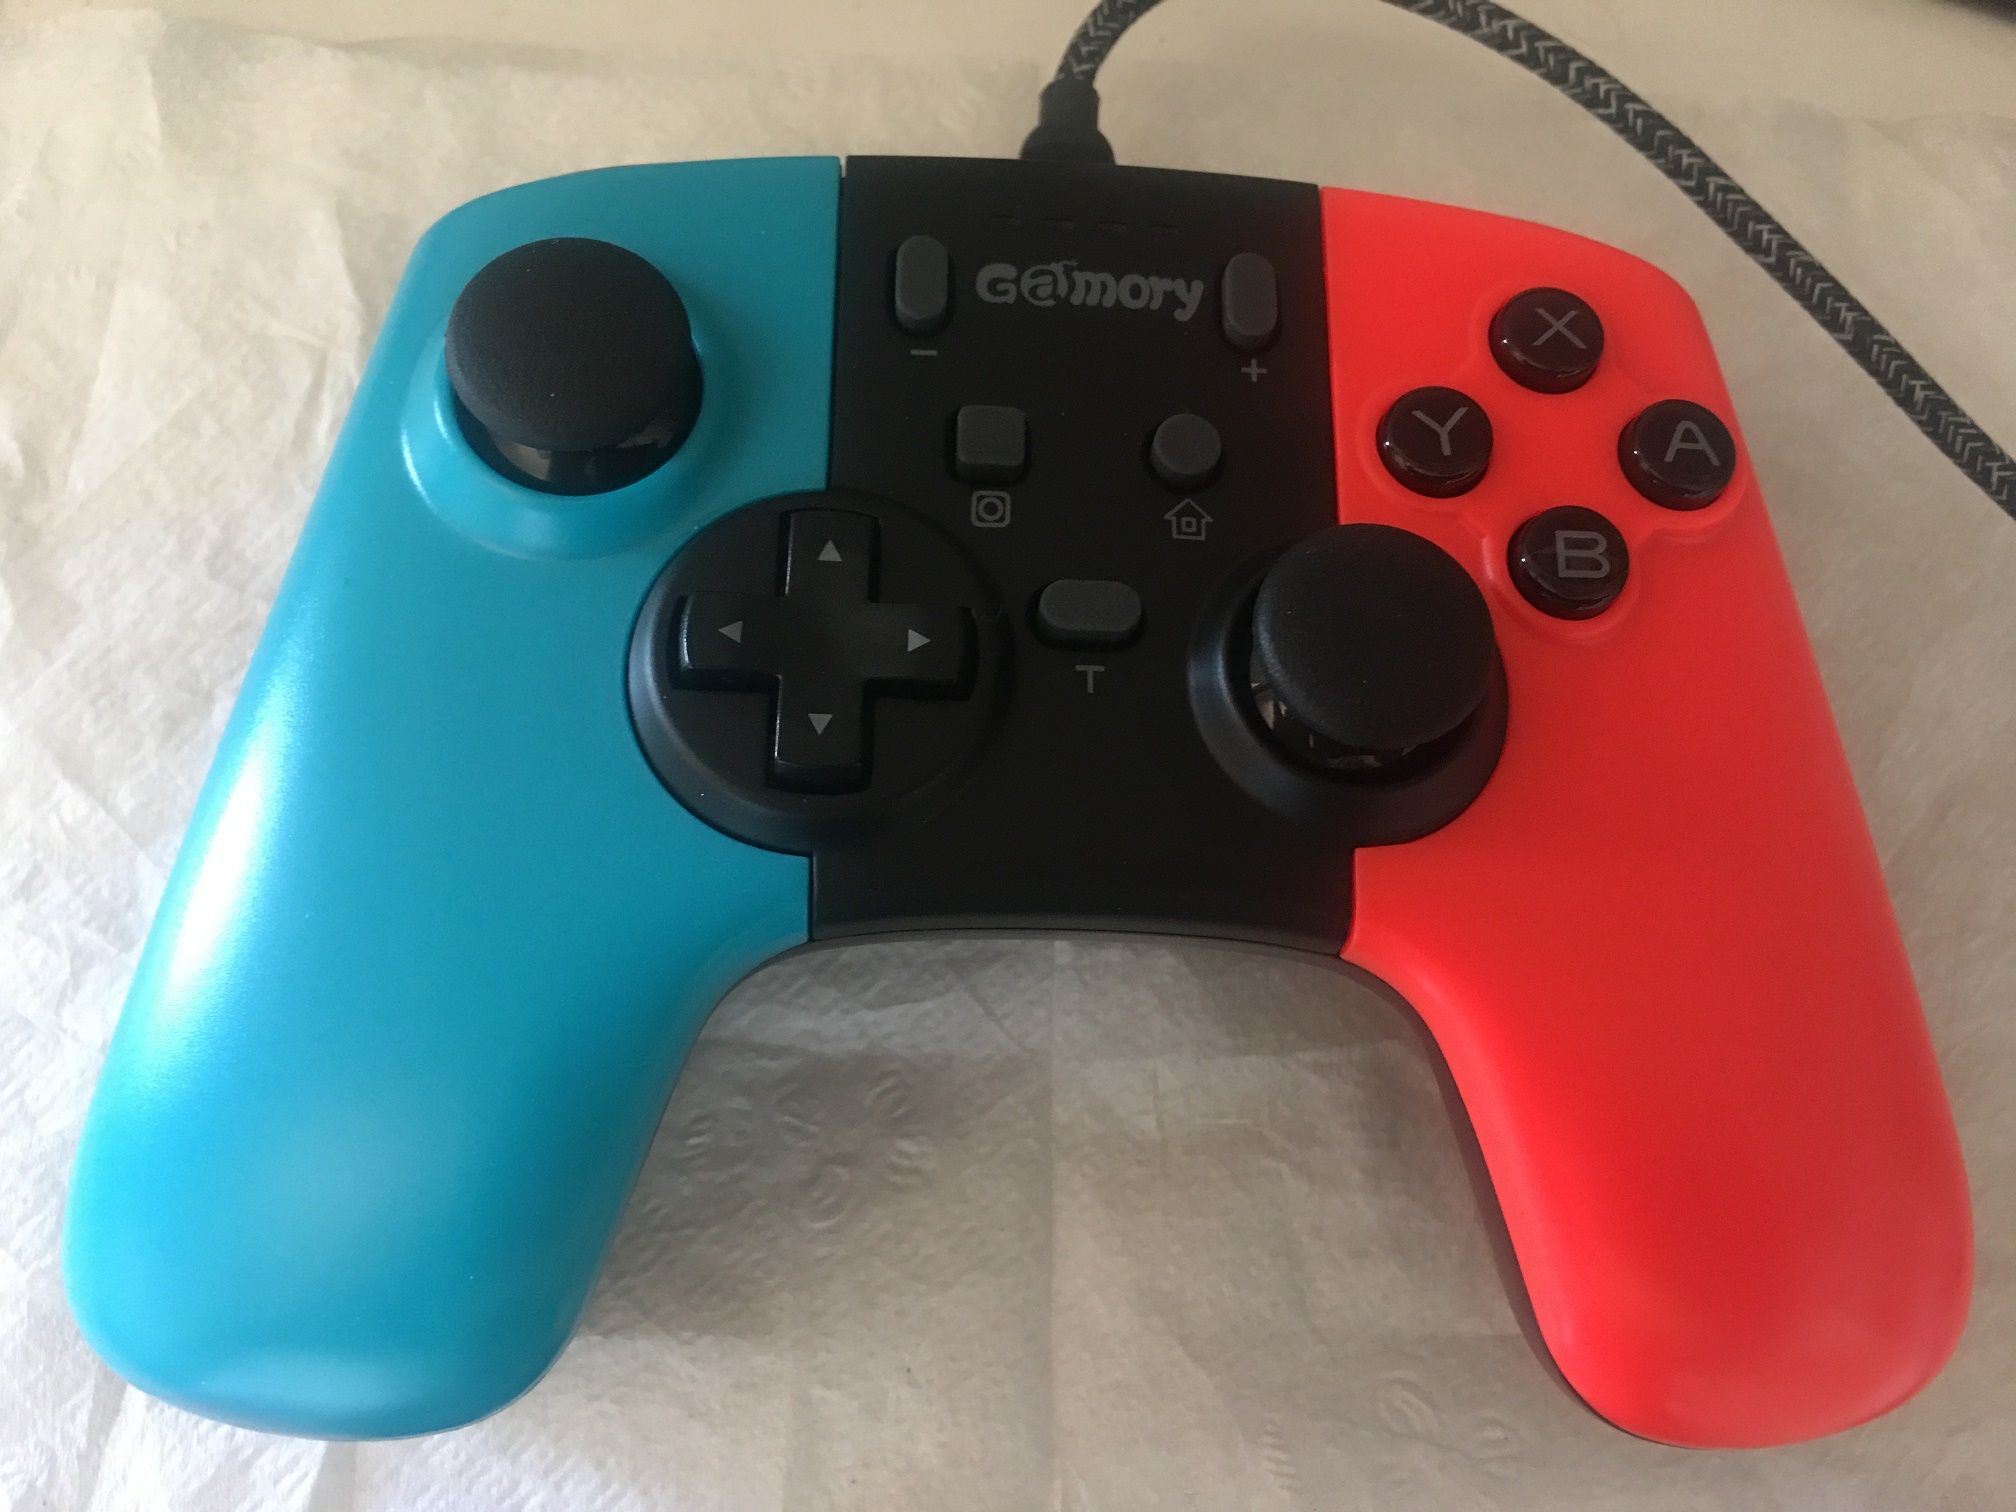 Gamory controller for Switch Lite and Switch Pro